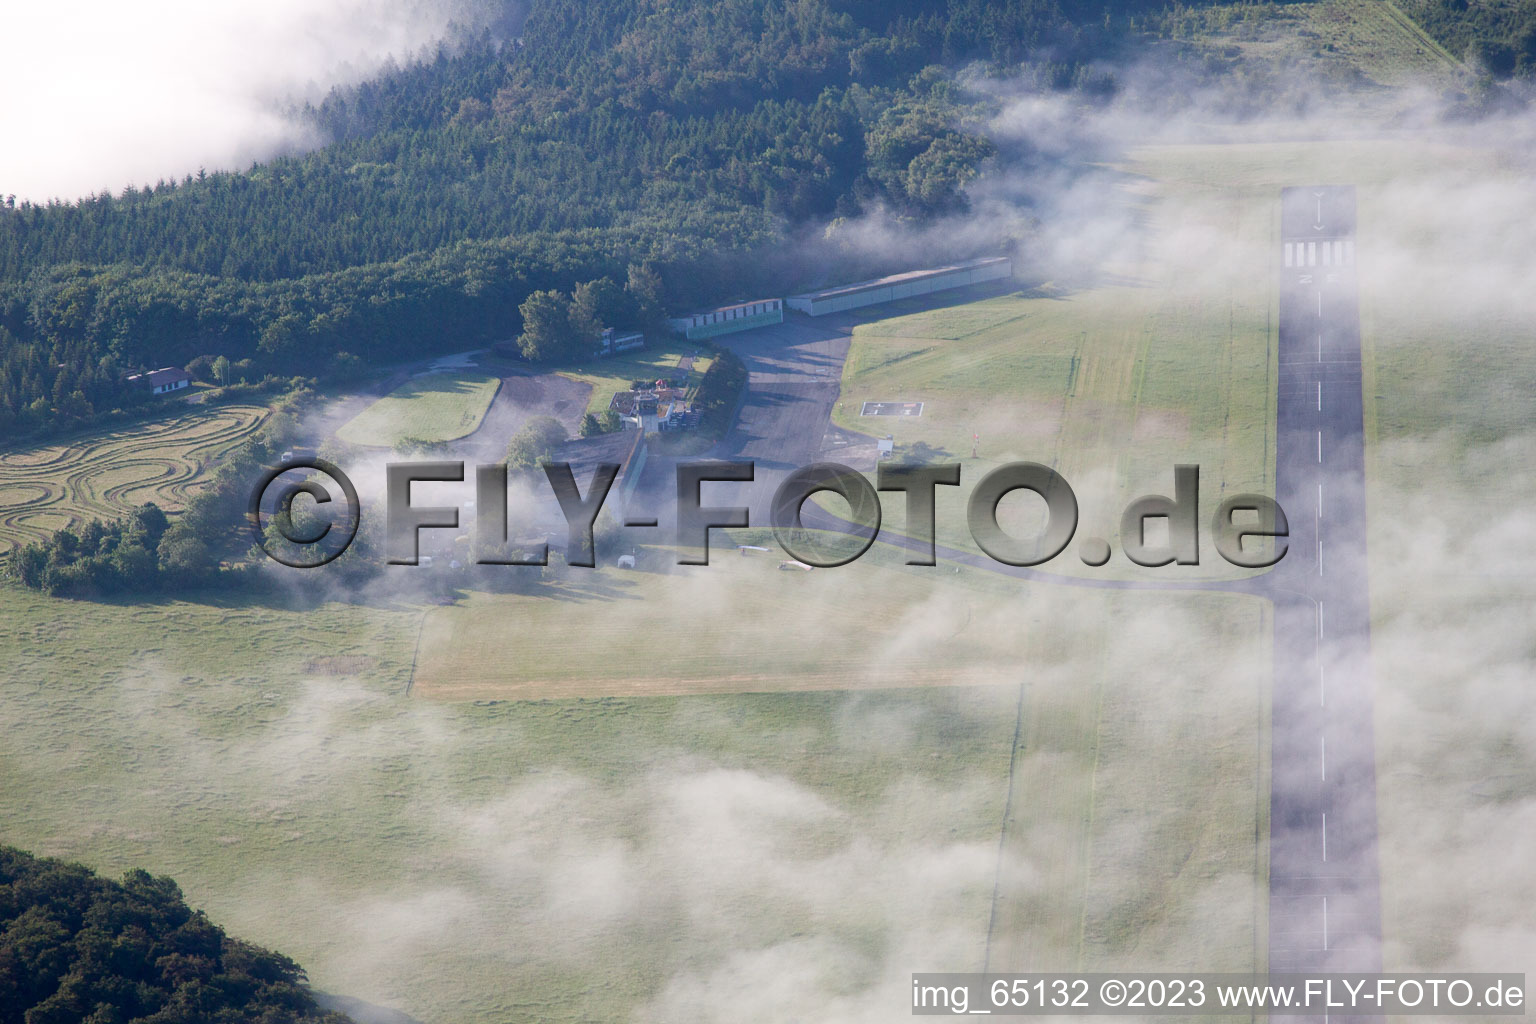 Airfield in Höxter in the state North Rhine-Westphalia, Germany seen from above